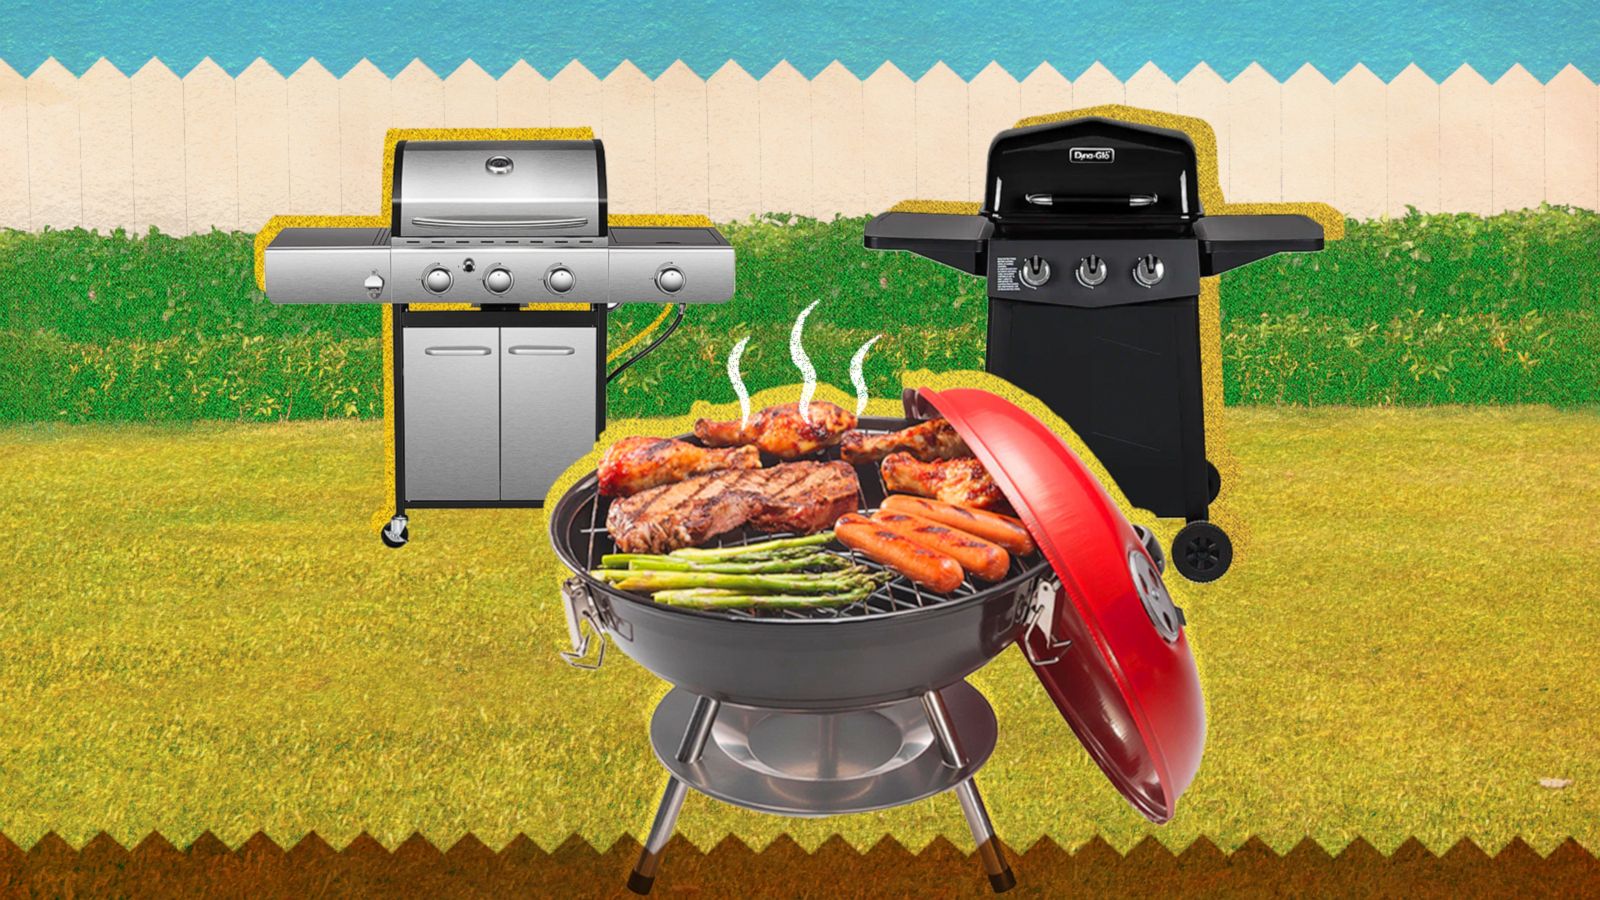 Shop charcoal grills and more for your next spring summer barbeque - Good Morning America